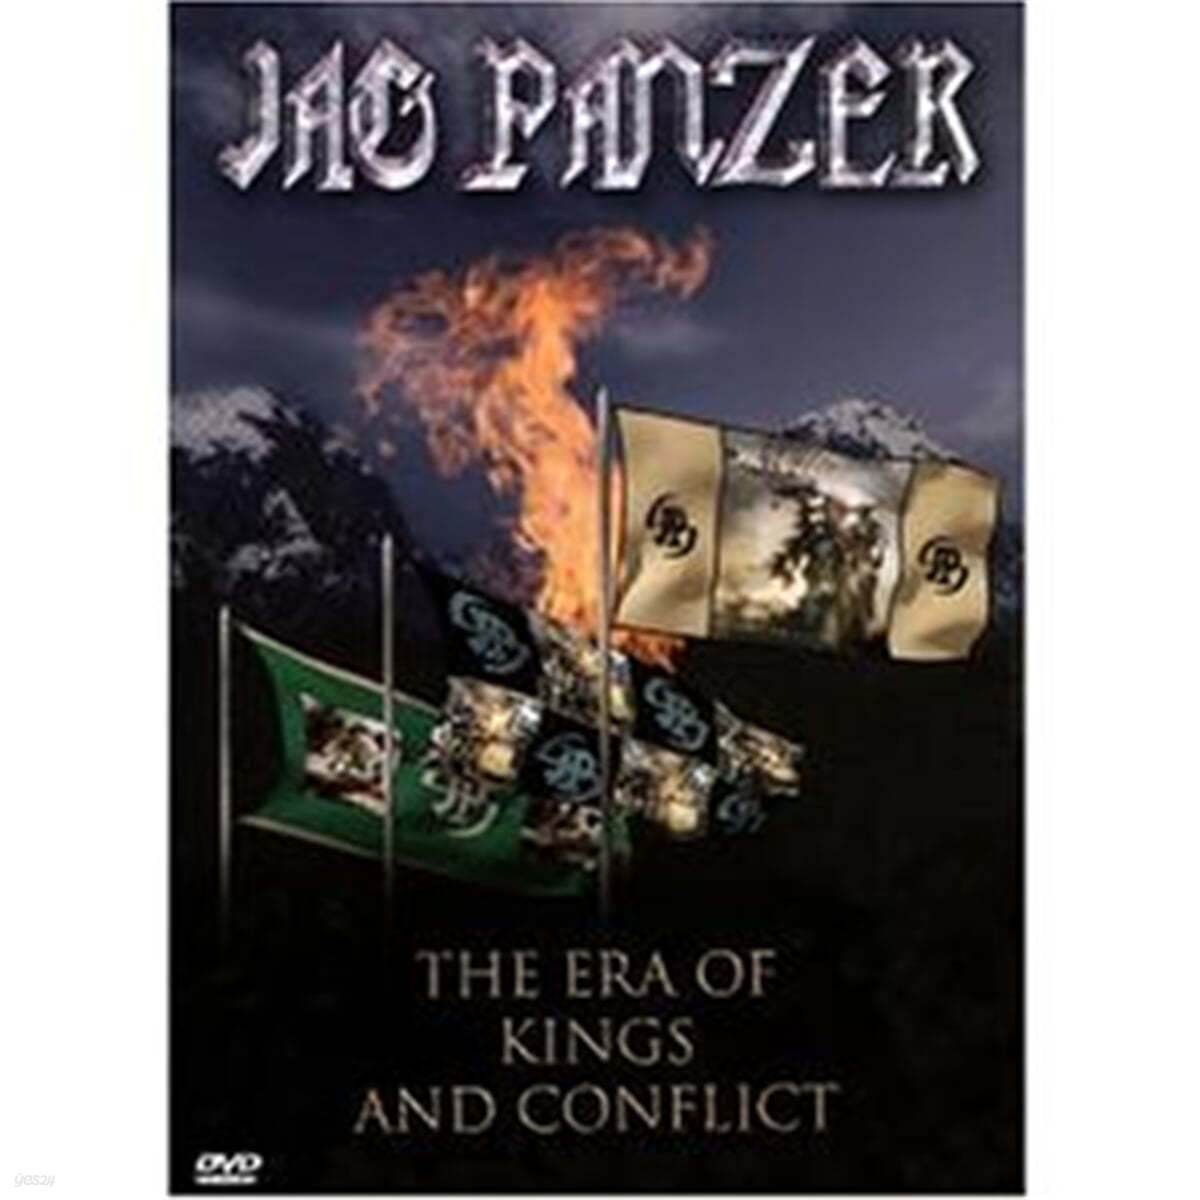 Jag Panzer (재그 팬저) - The Era Of Kings And Conflict 